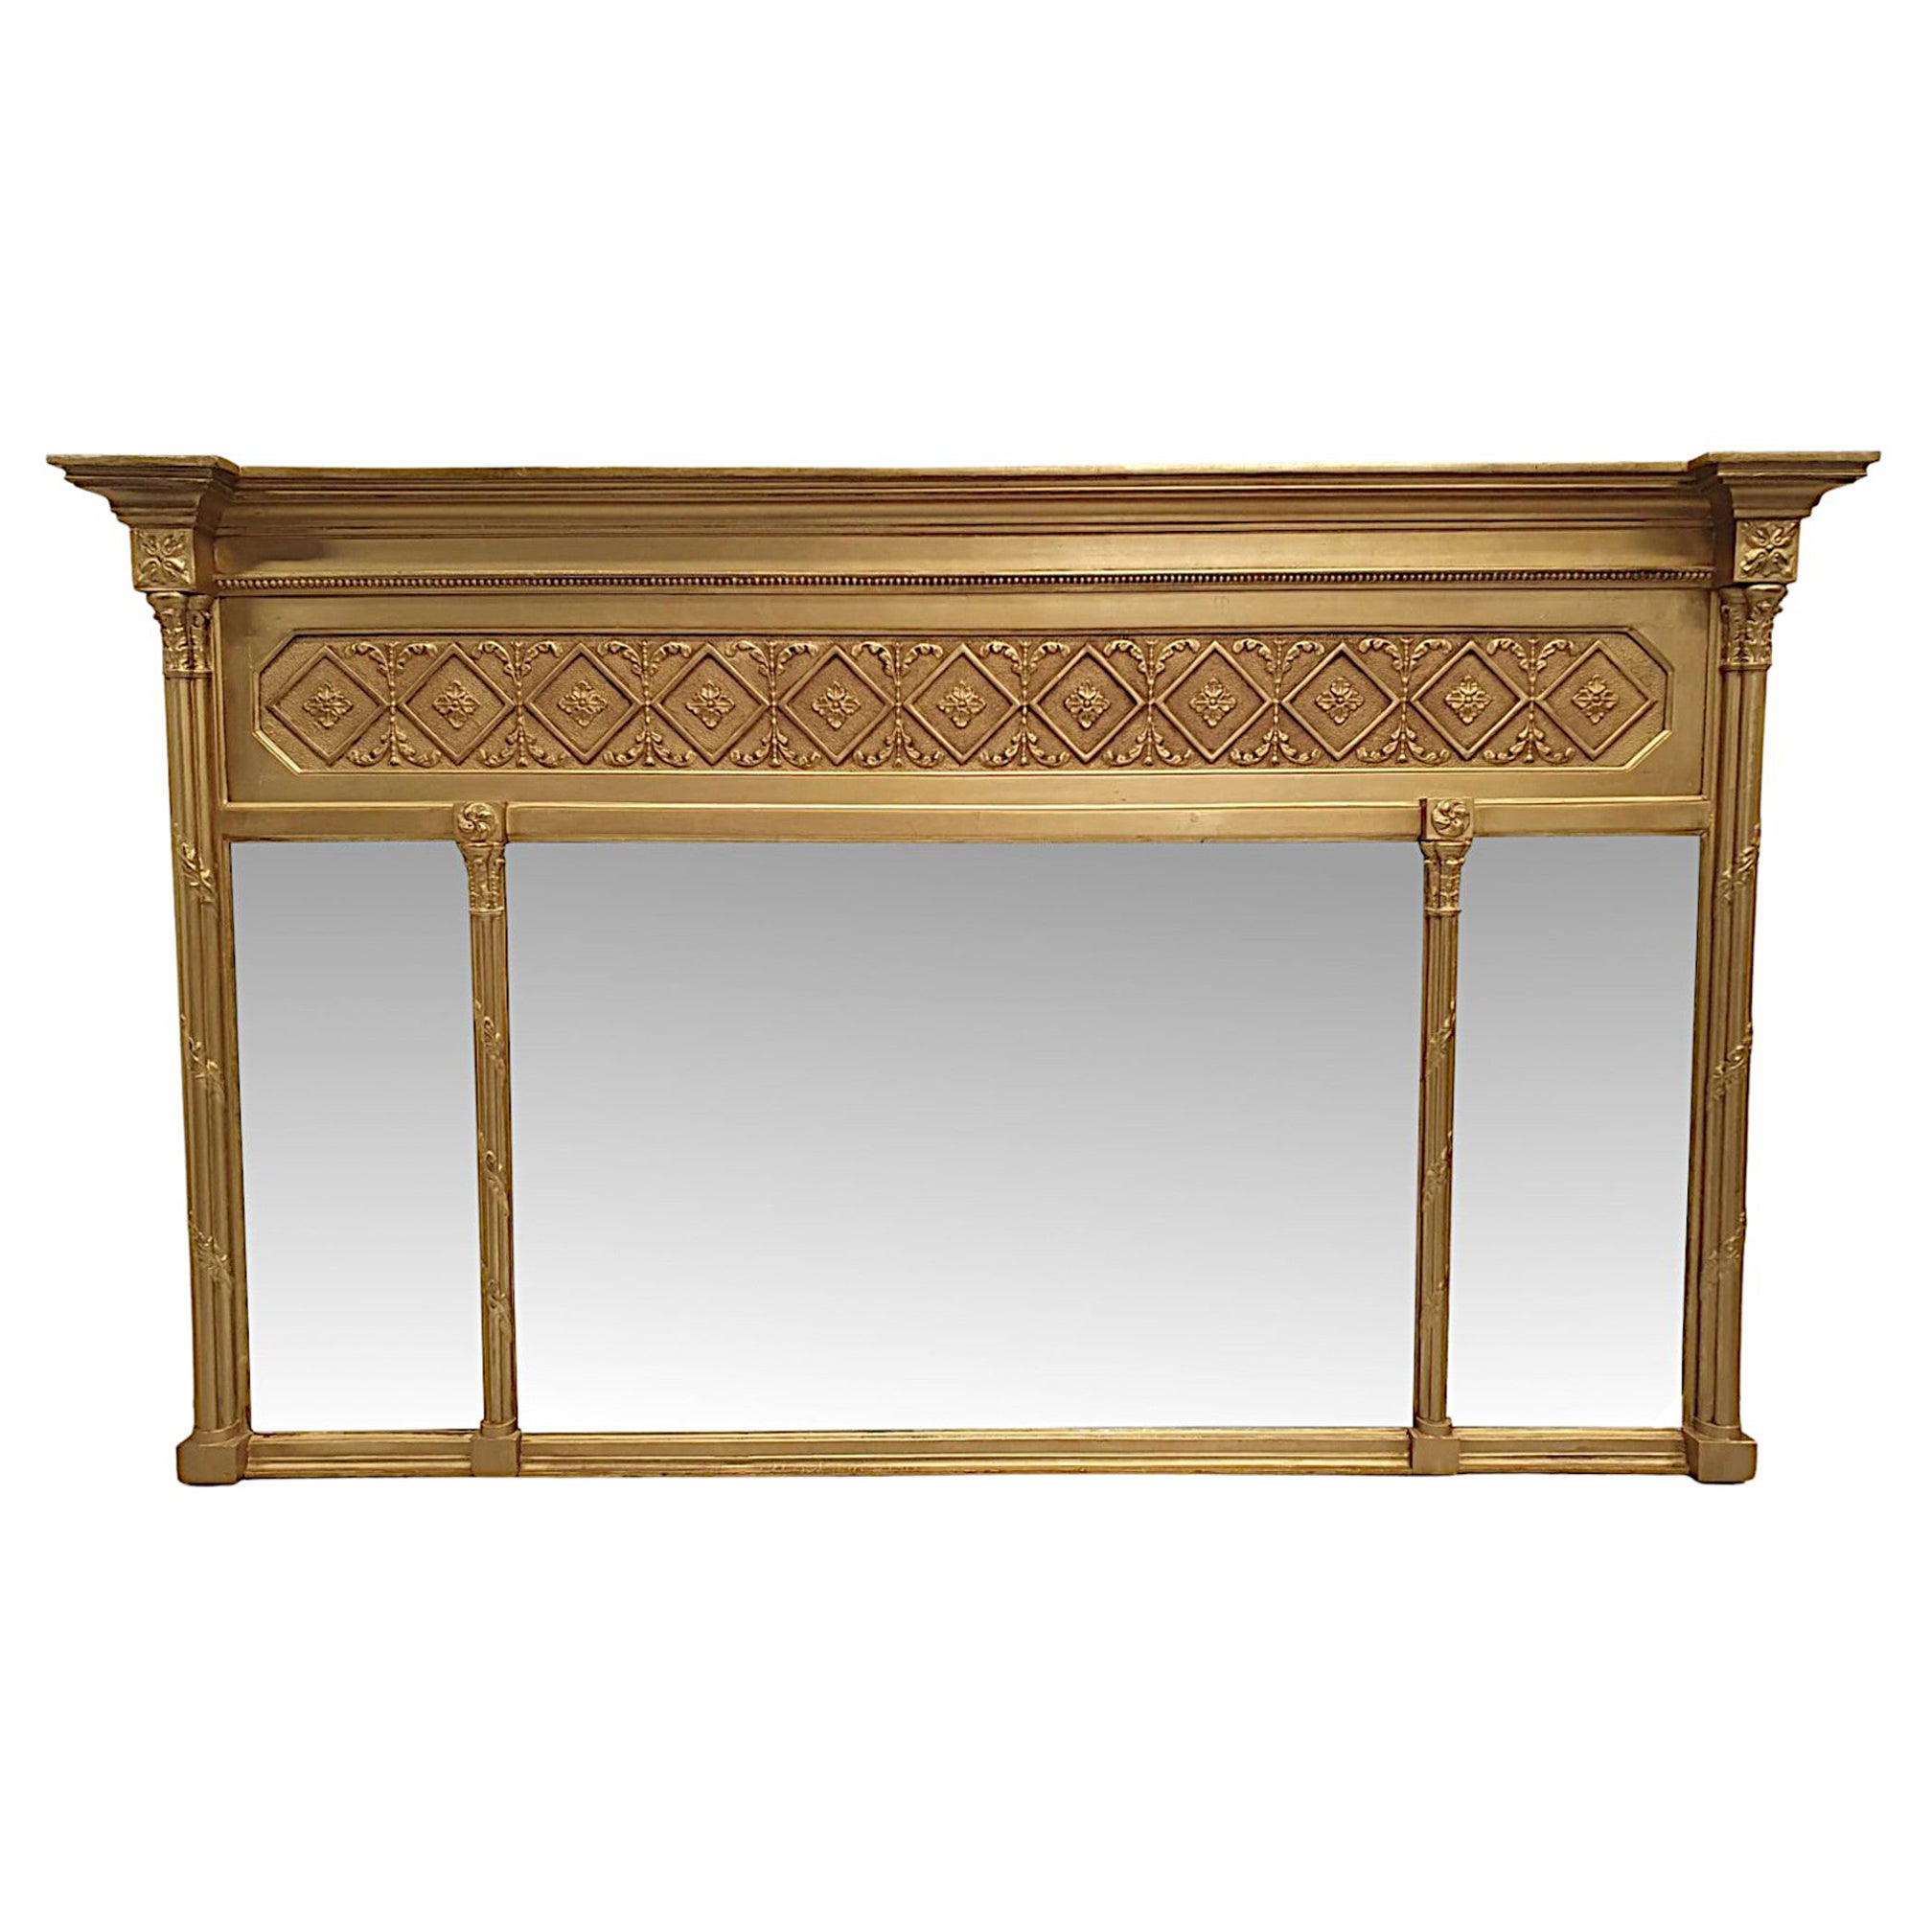 Very Rare and Fine 19th Century Three Compartmental Giltwood Overmantle Mirror For Sale